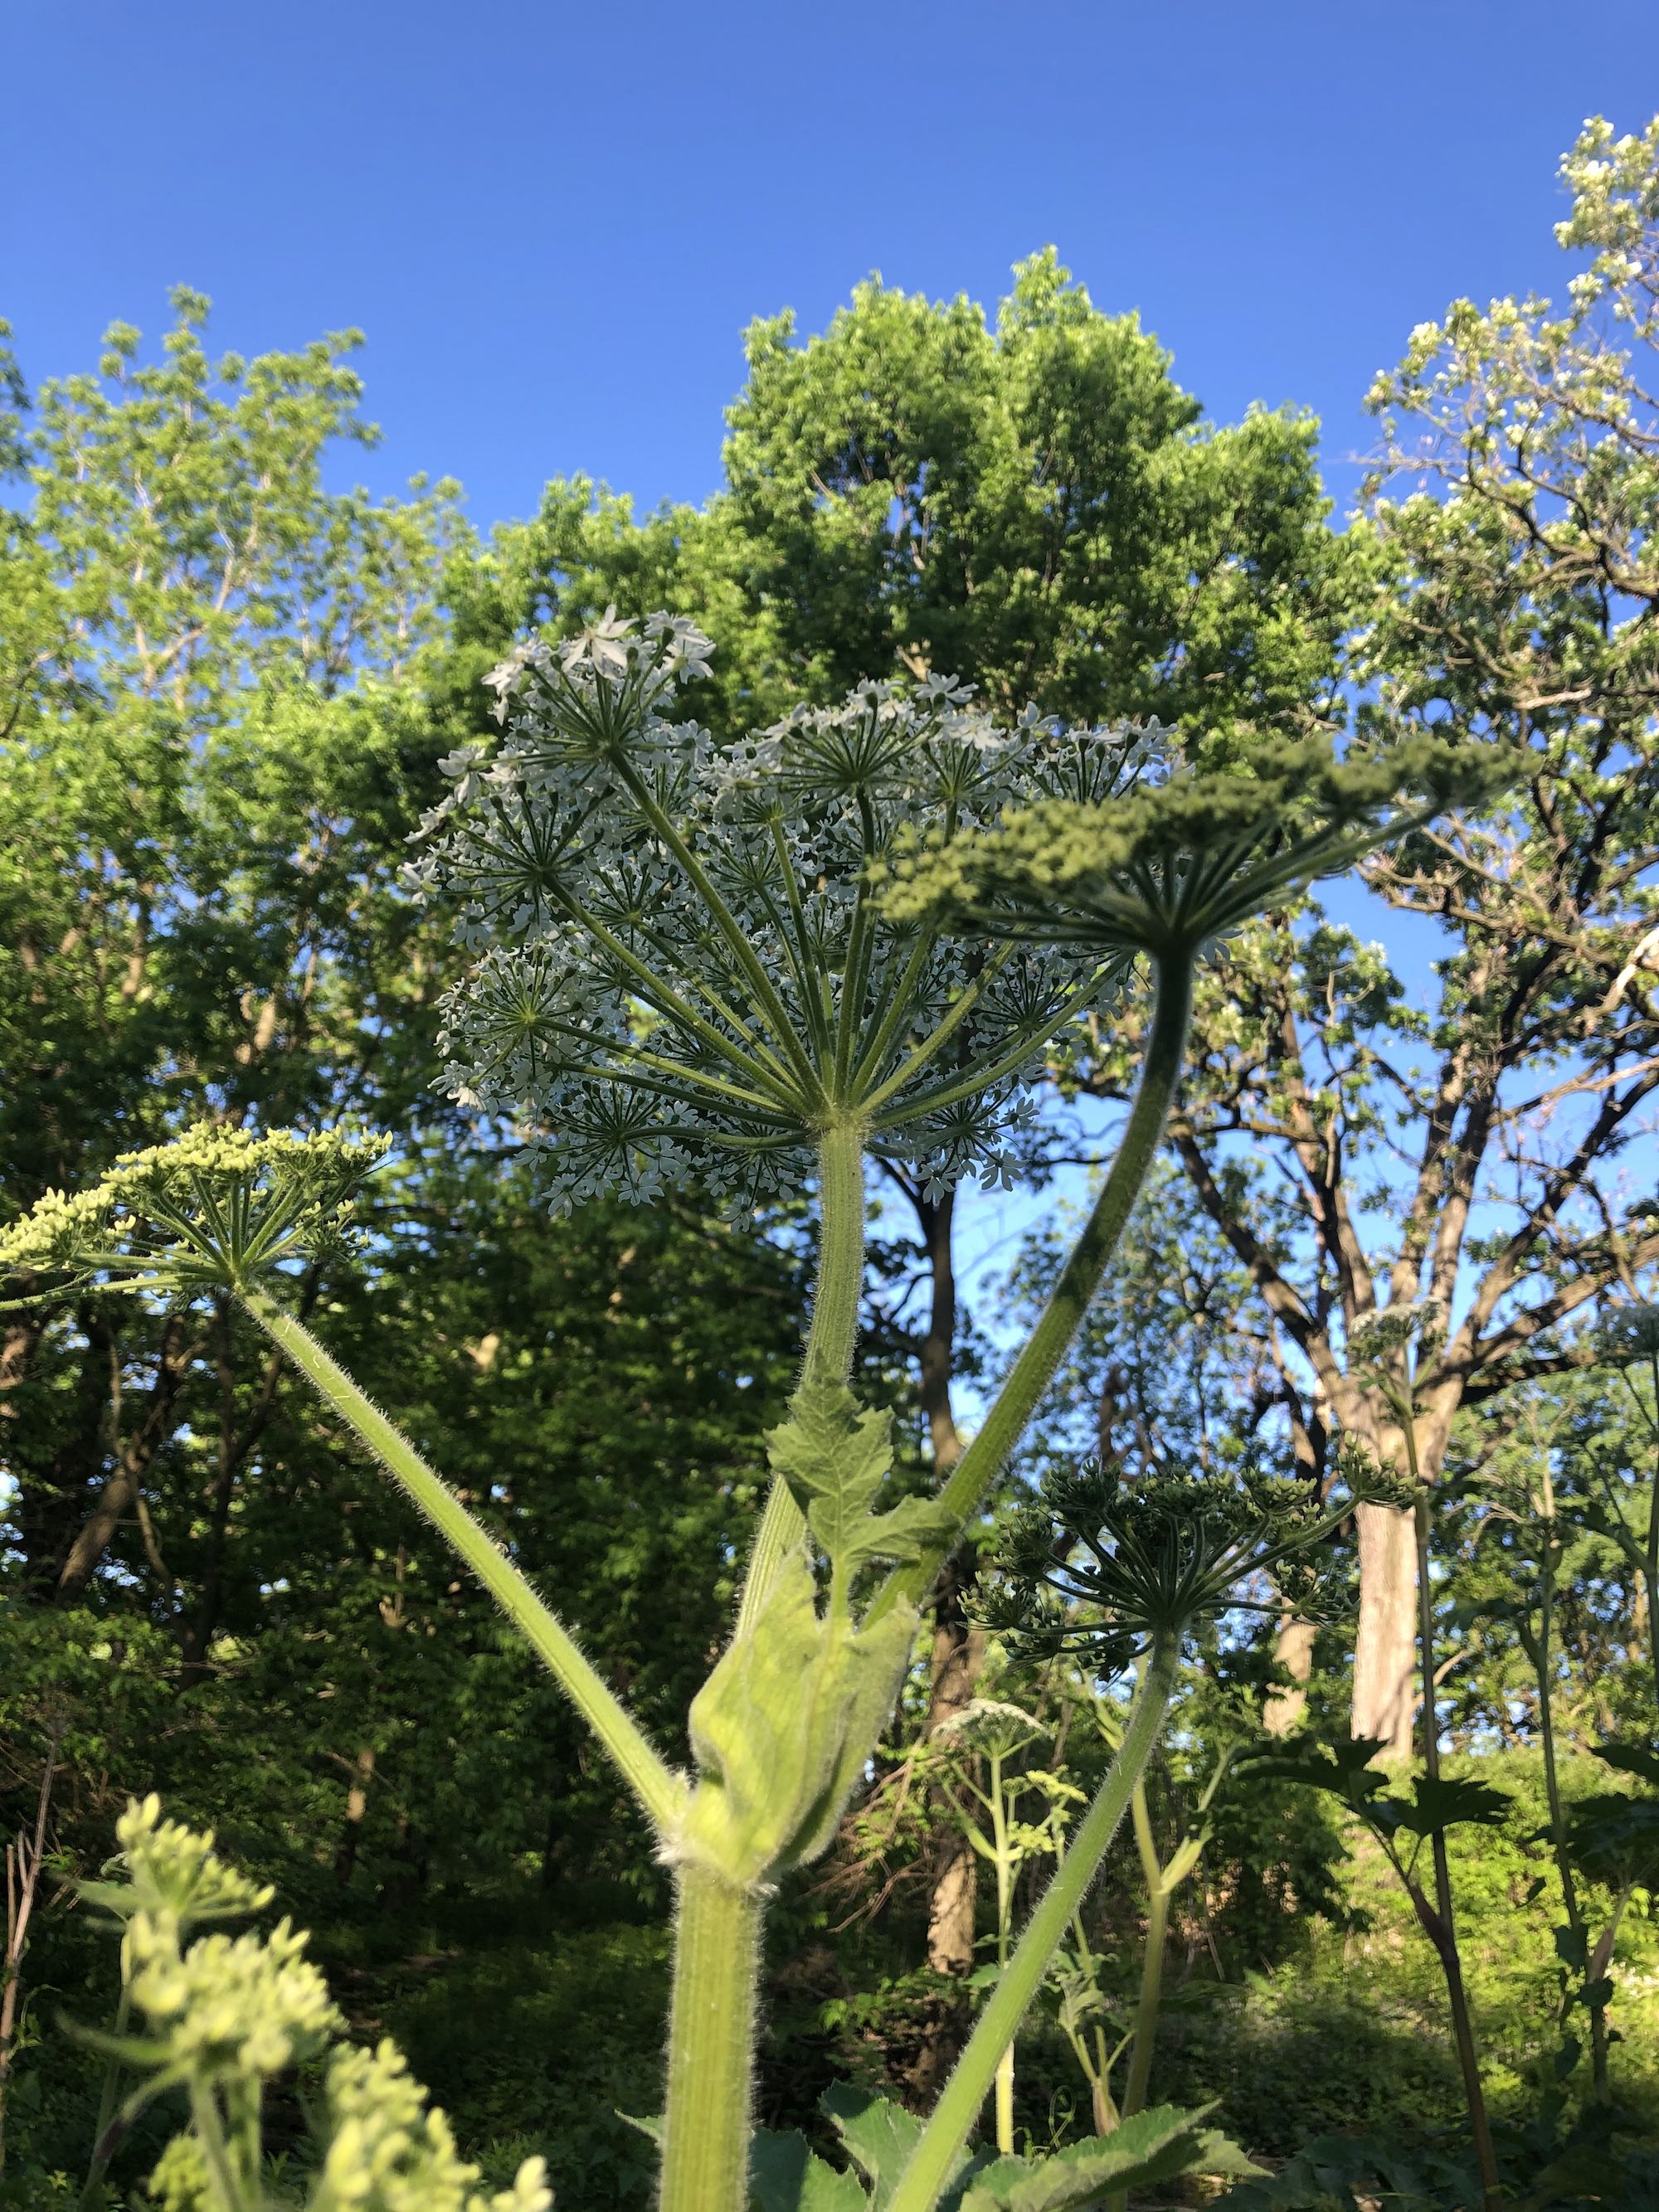 Cow Parsnip near Council Ring in Oak Savanna in Madison, Wisconsin on May 31, 2020.